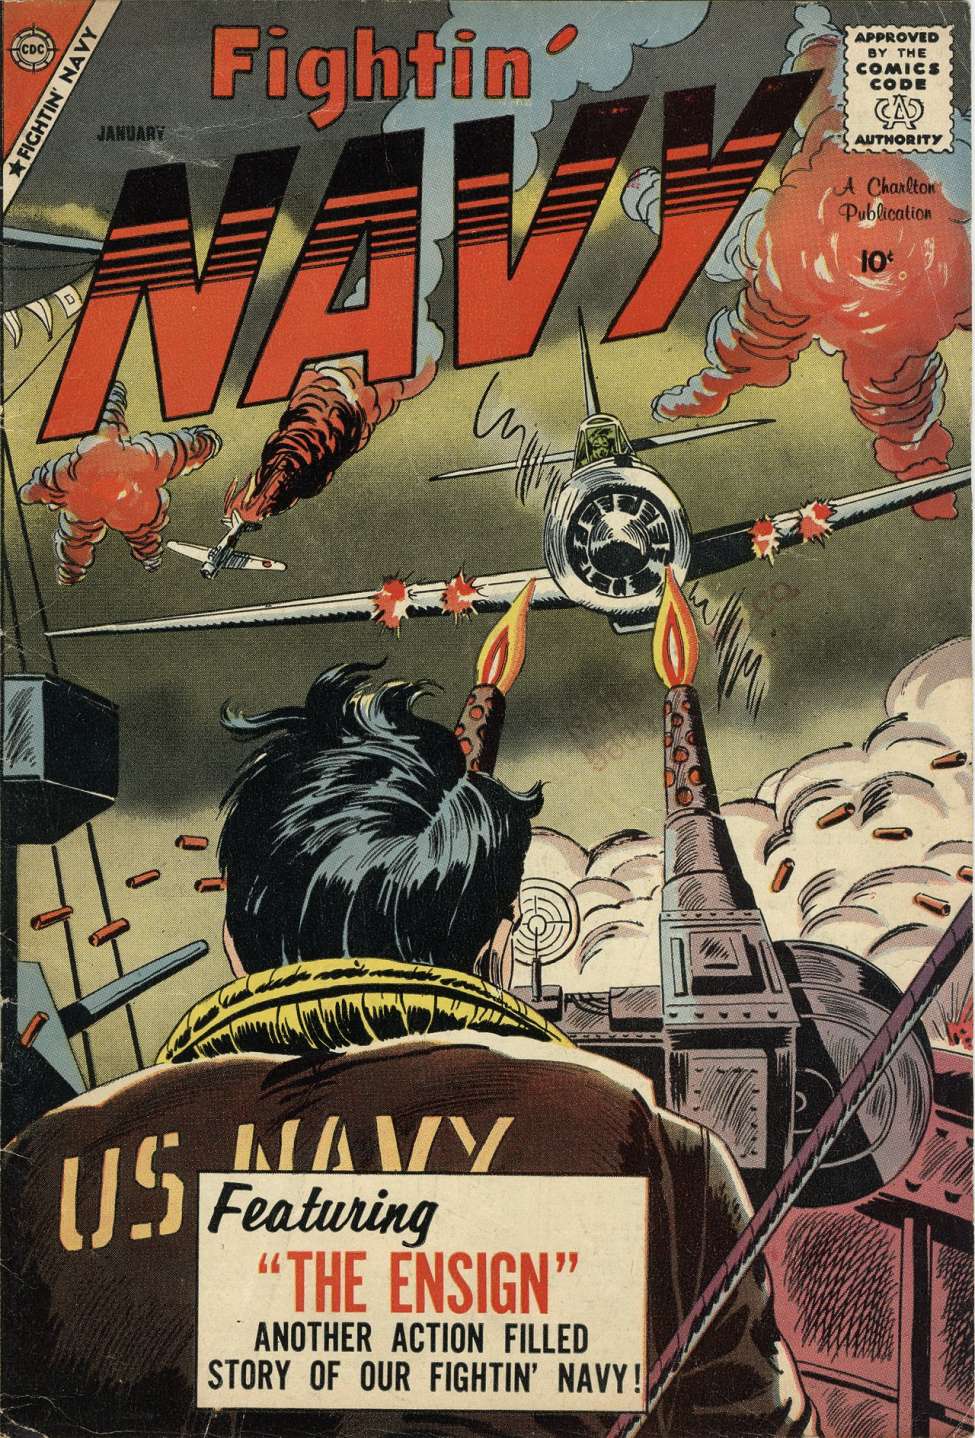 Comic Book Cover For Fightin' Navy 85 - Version 2